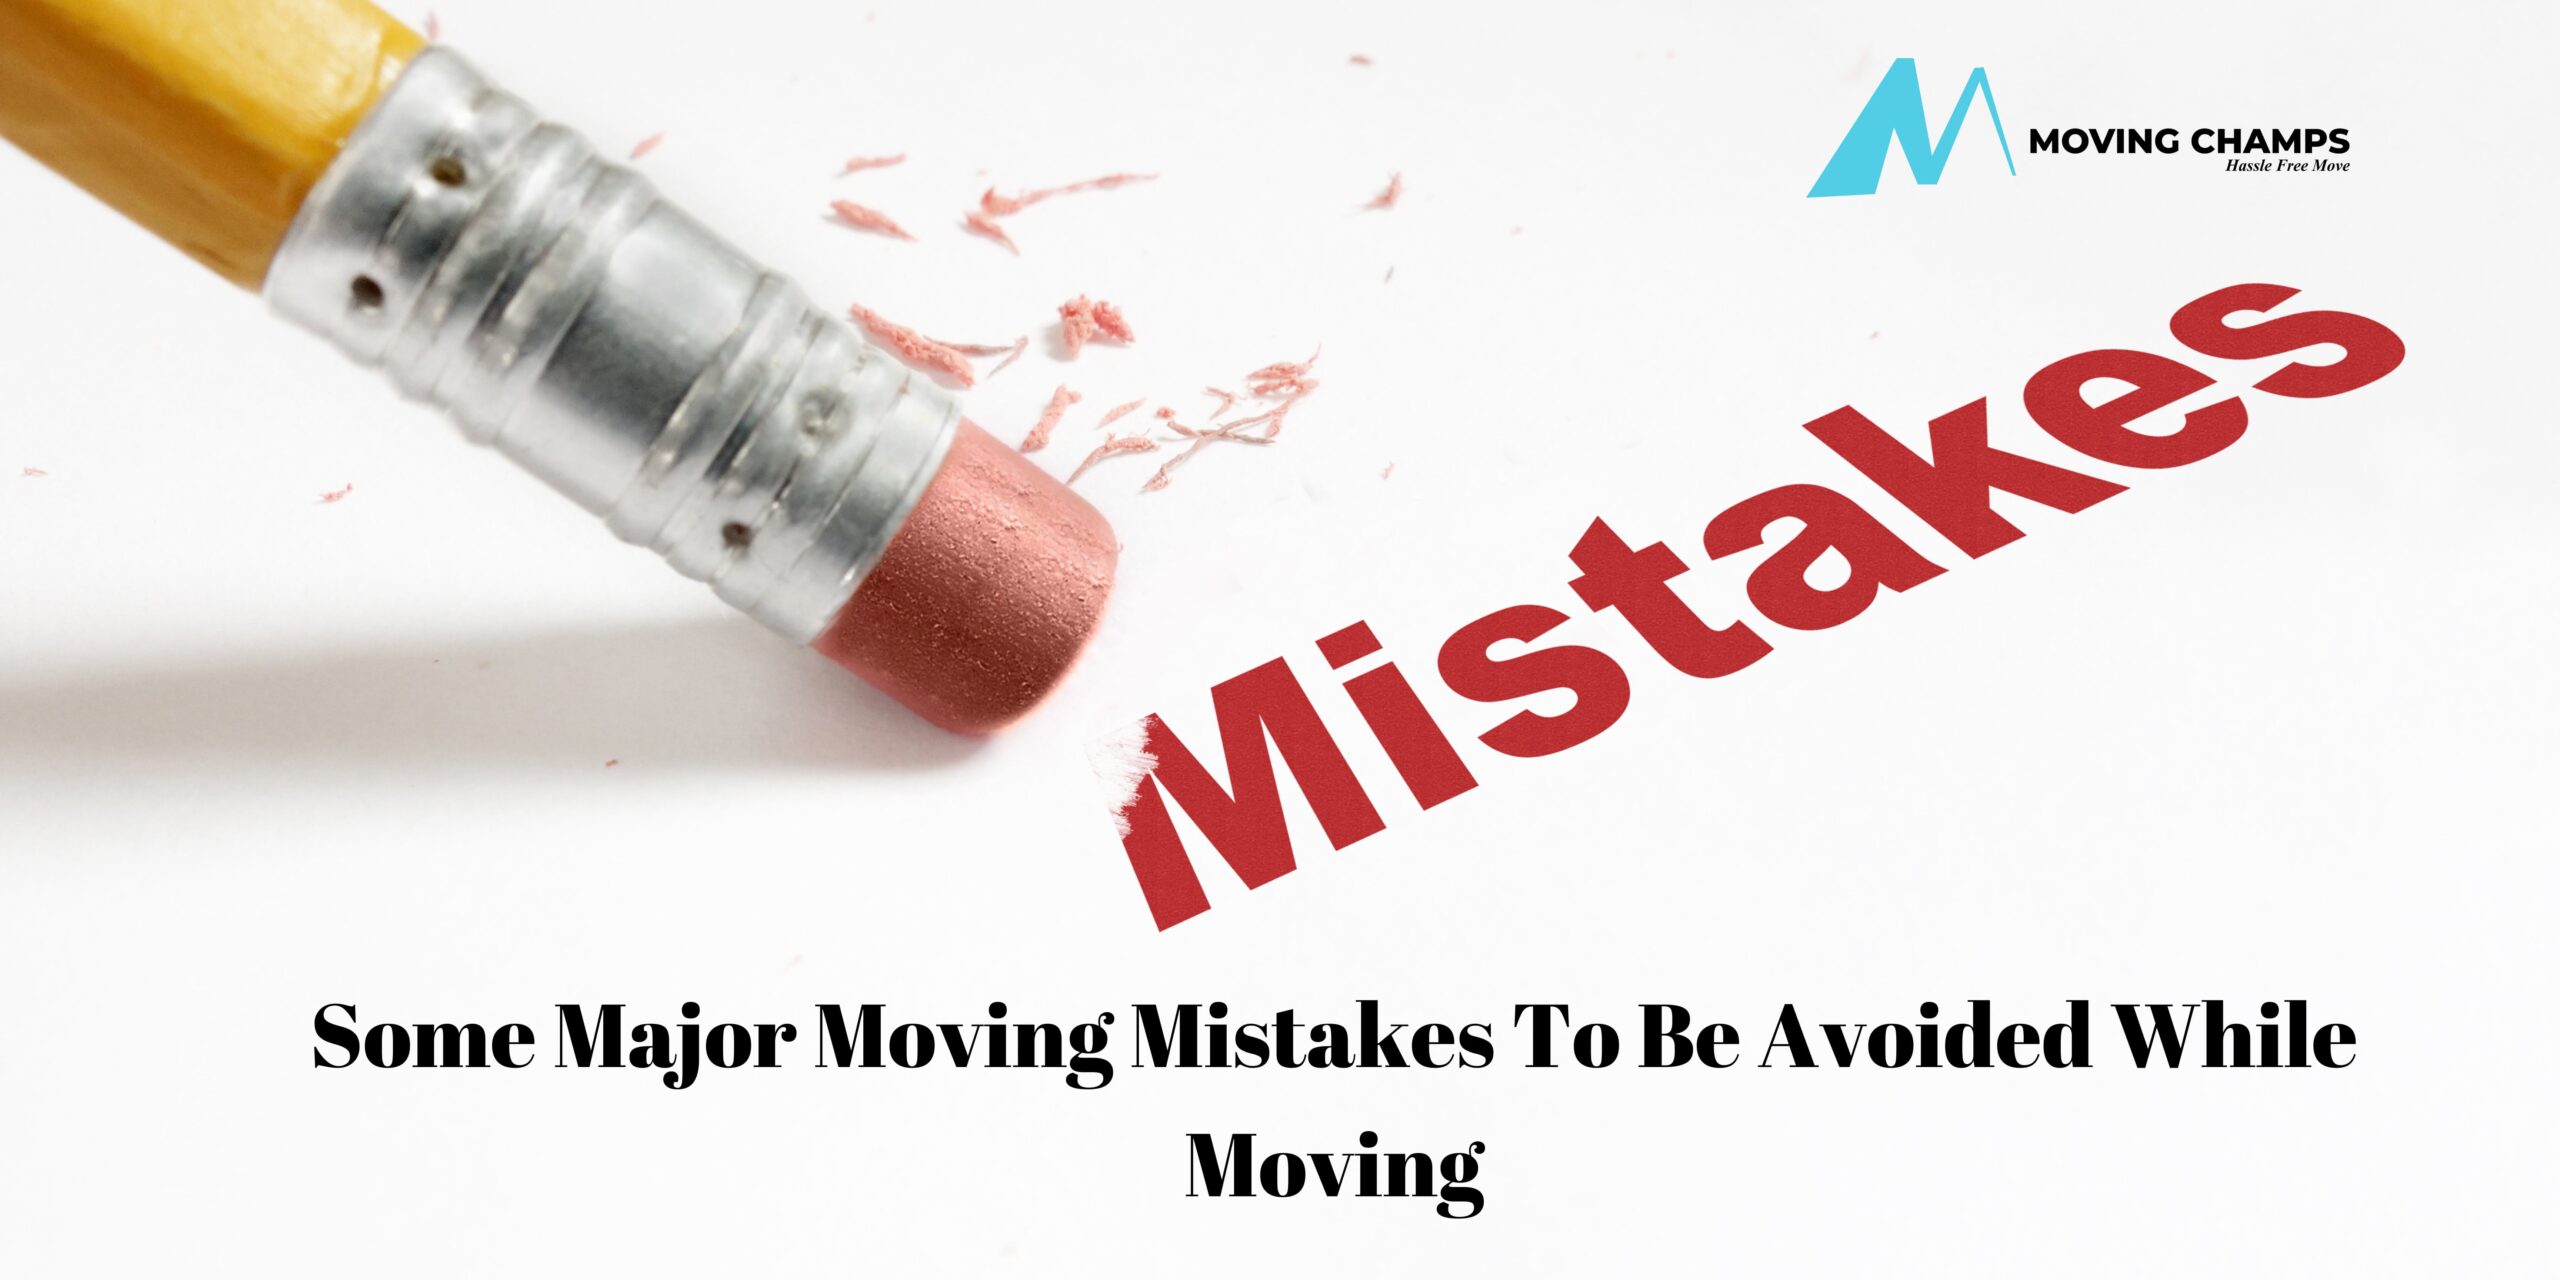 Some Major Moving Mistakes To Be Avoided While Moving